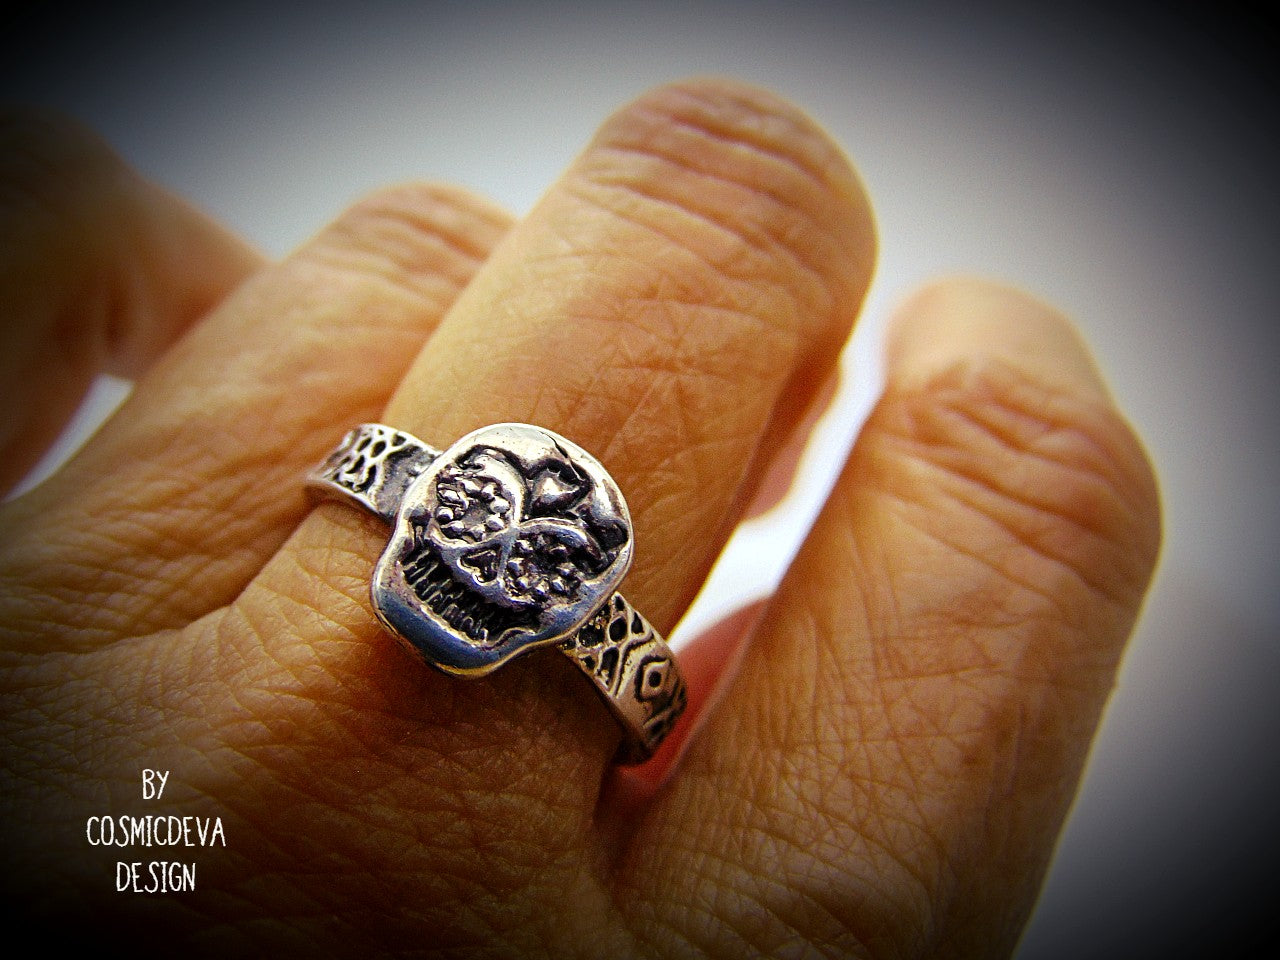 Handmade cute dainty sugar scull sterling silver ring. The inside of the ring has a polish with a few small irregularities from the forming process. The sterling silver sugar scull ring has been oxidized. The sugar skull is the predominant symbol of the "Day of the Dead", or Día de Los Muertos in Mexican culture. 